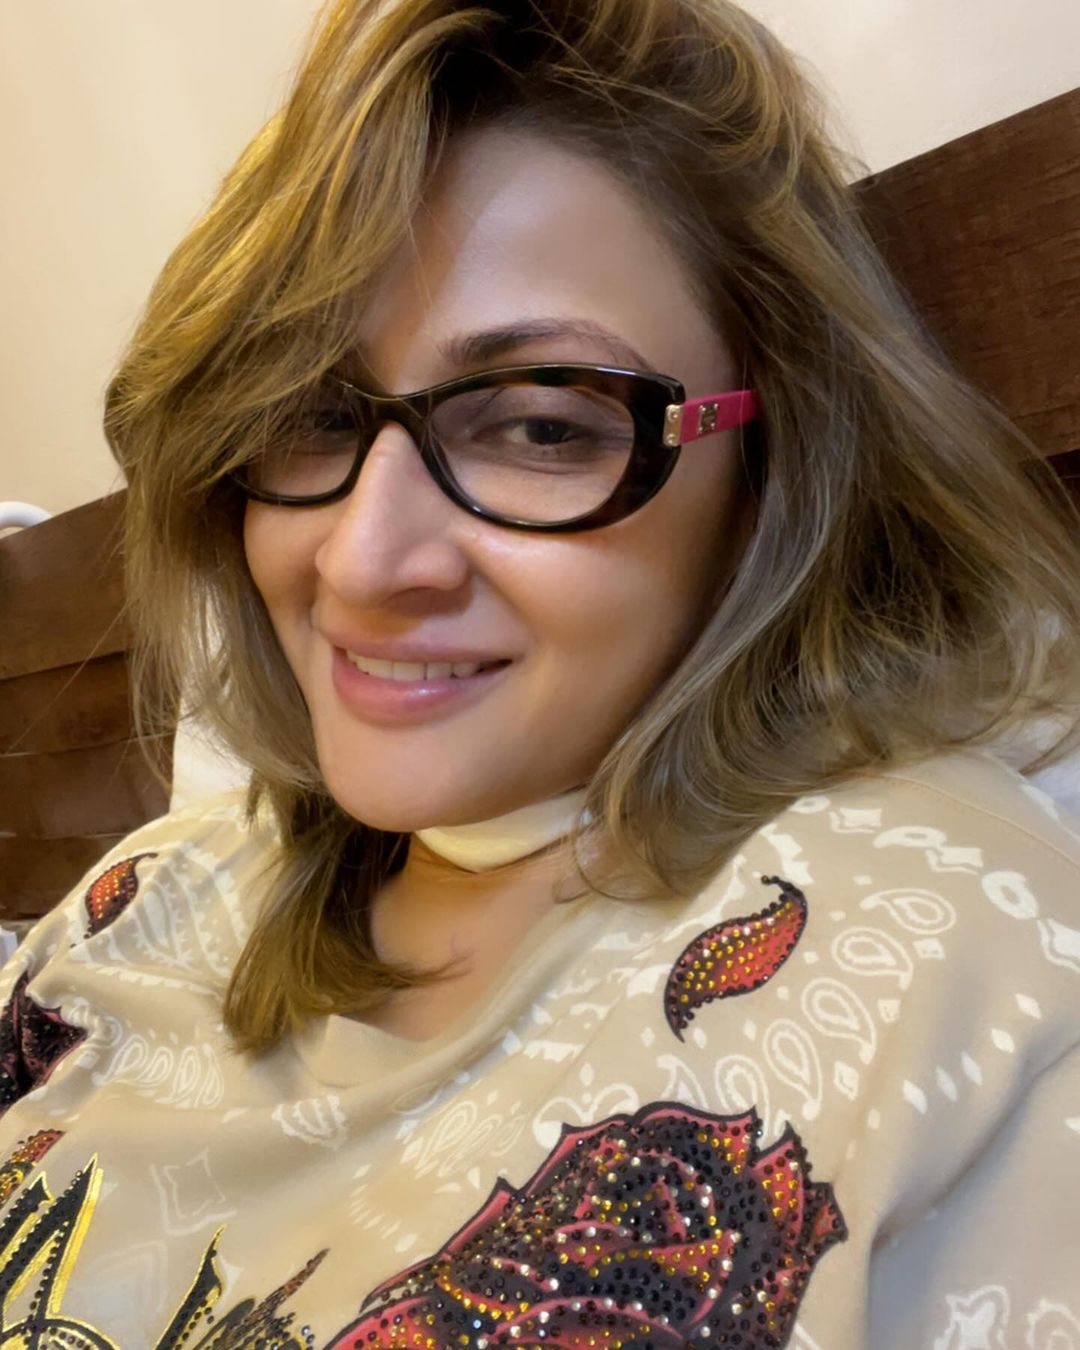 Kasauti Zindagi Kay Actress Urvashi Dholakia Discharged From Hospital After Her Neck Surgery. She Shared the Post With The Caption “On A Road To Recovery” 